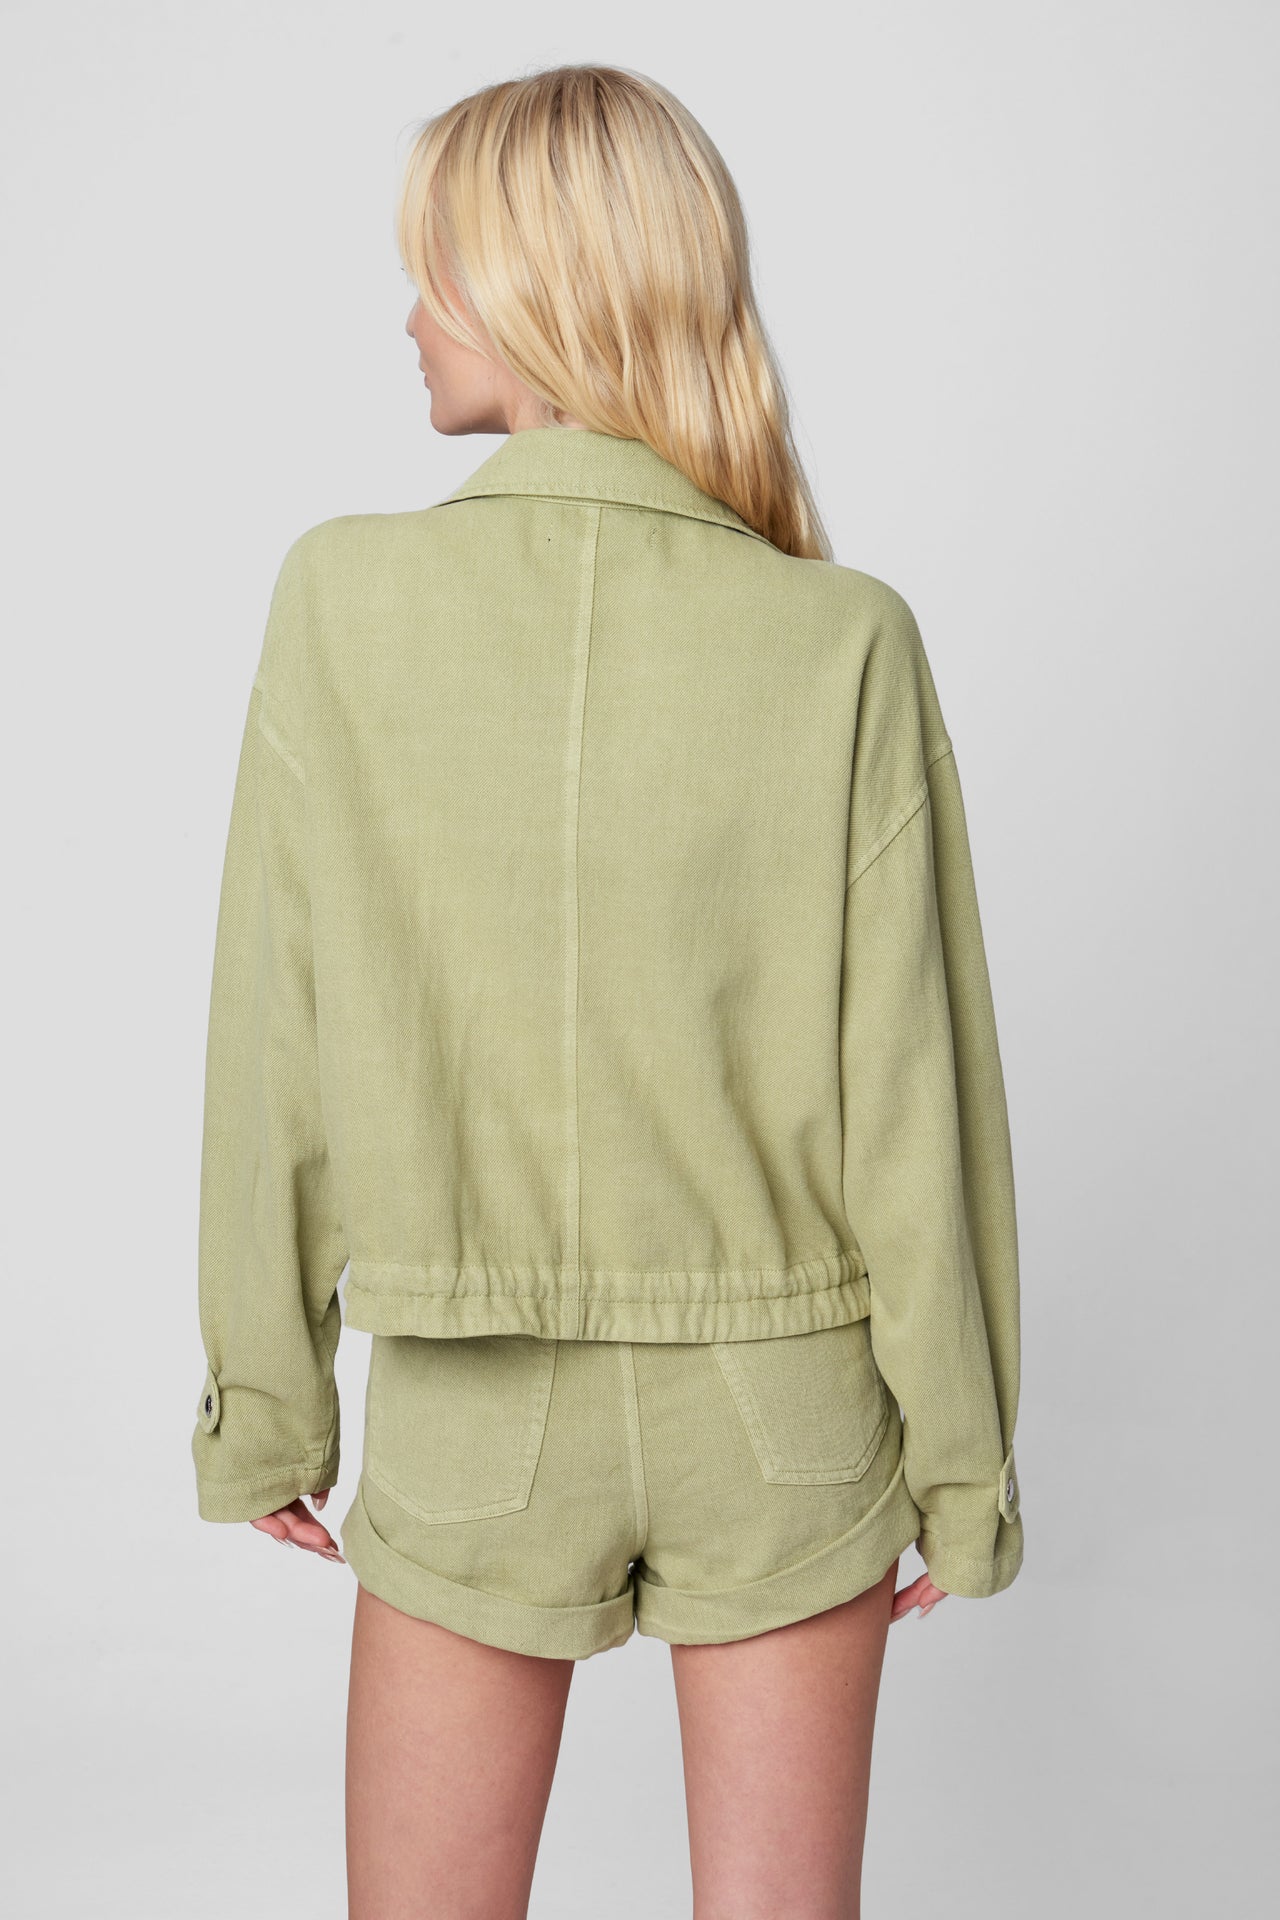 Green Light Linen Utility Jacket, Jacket by Blank NYC | LIT Boutique